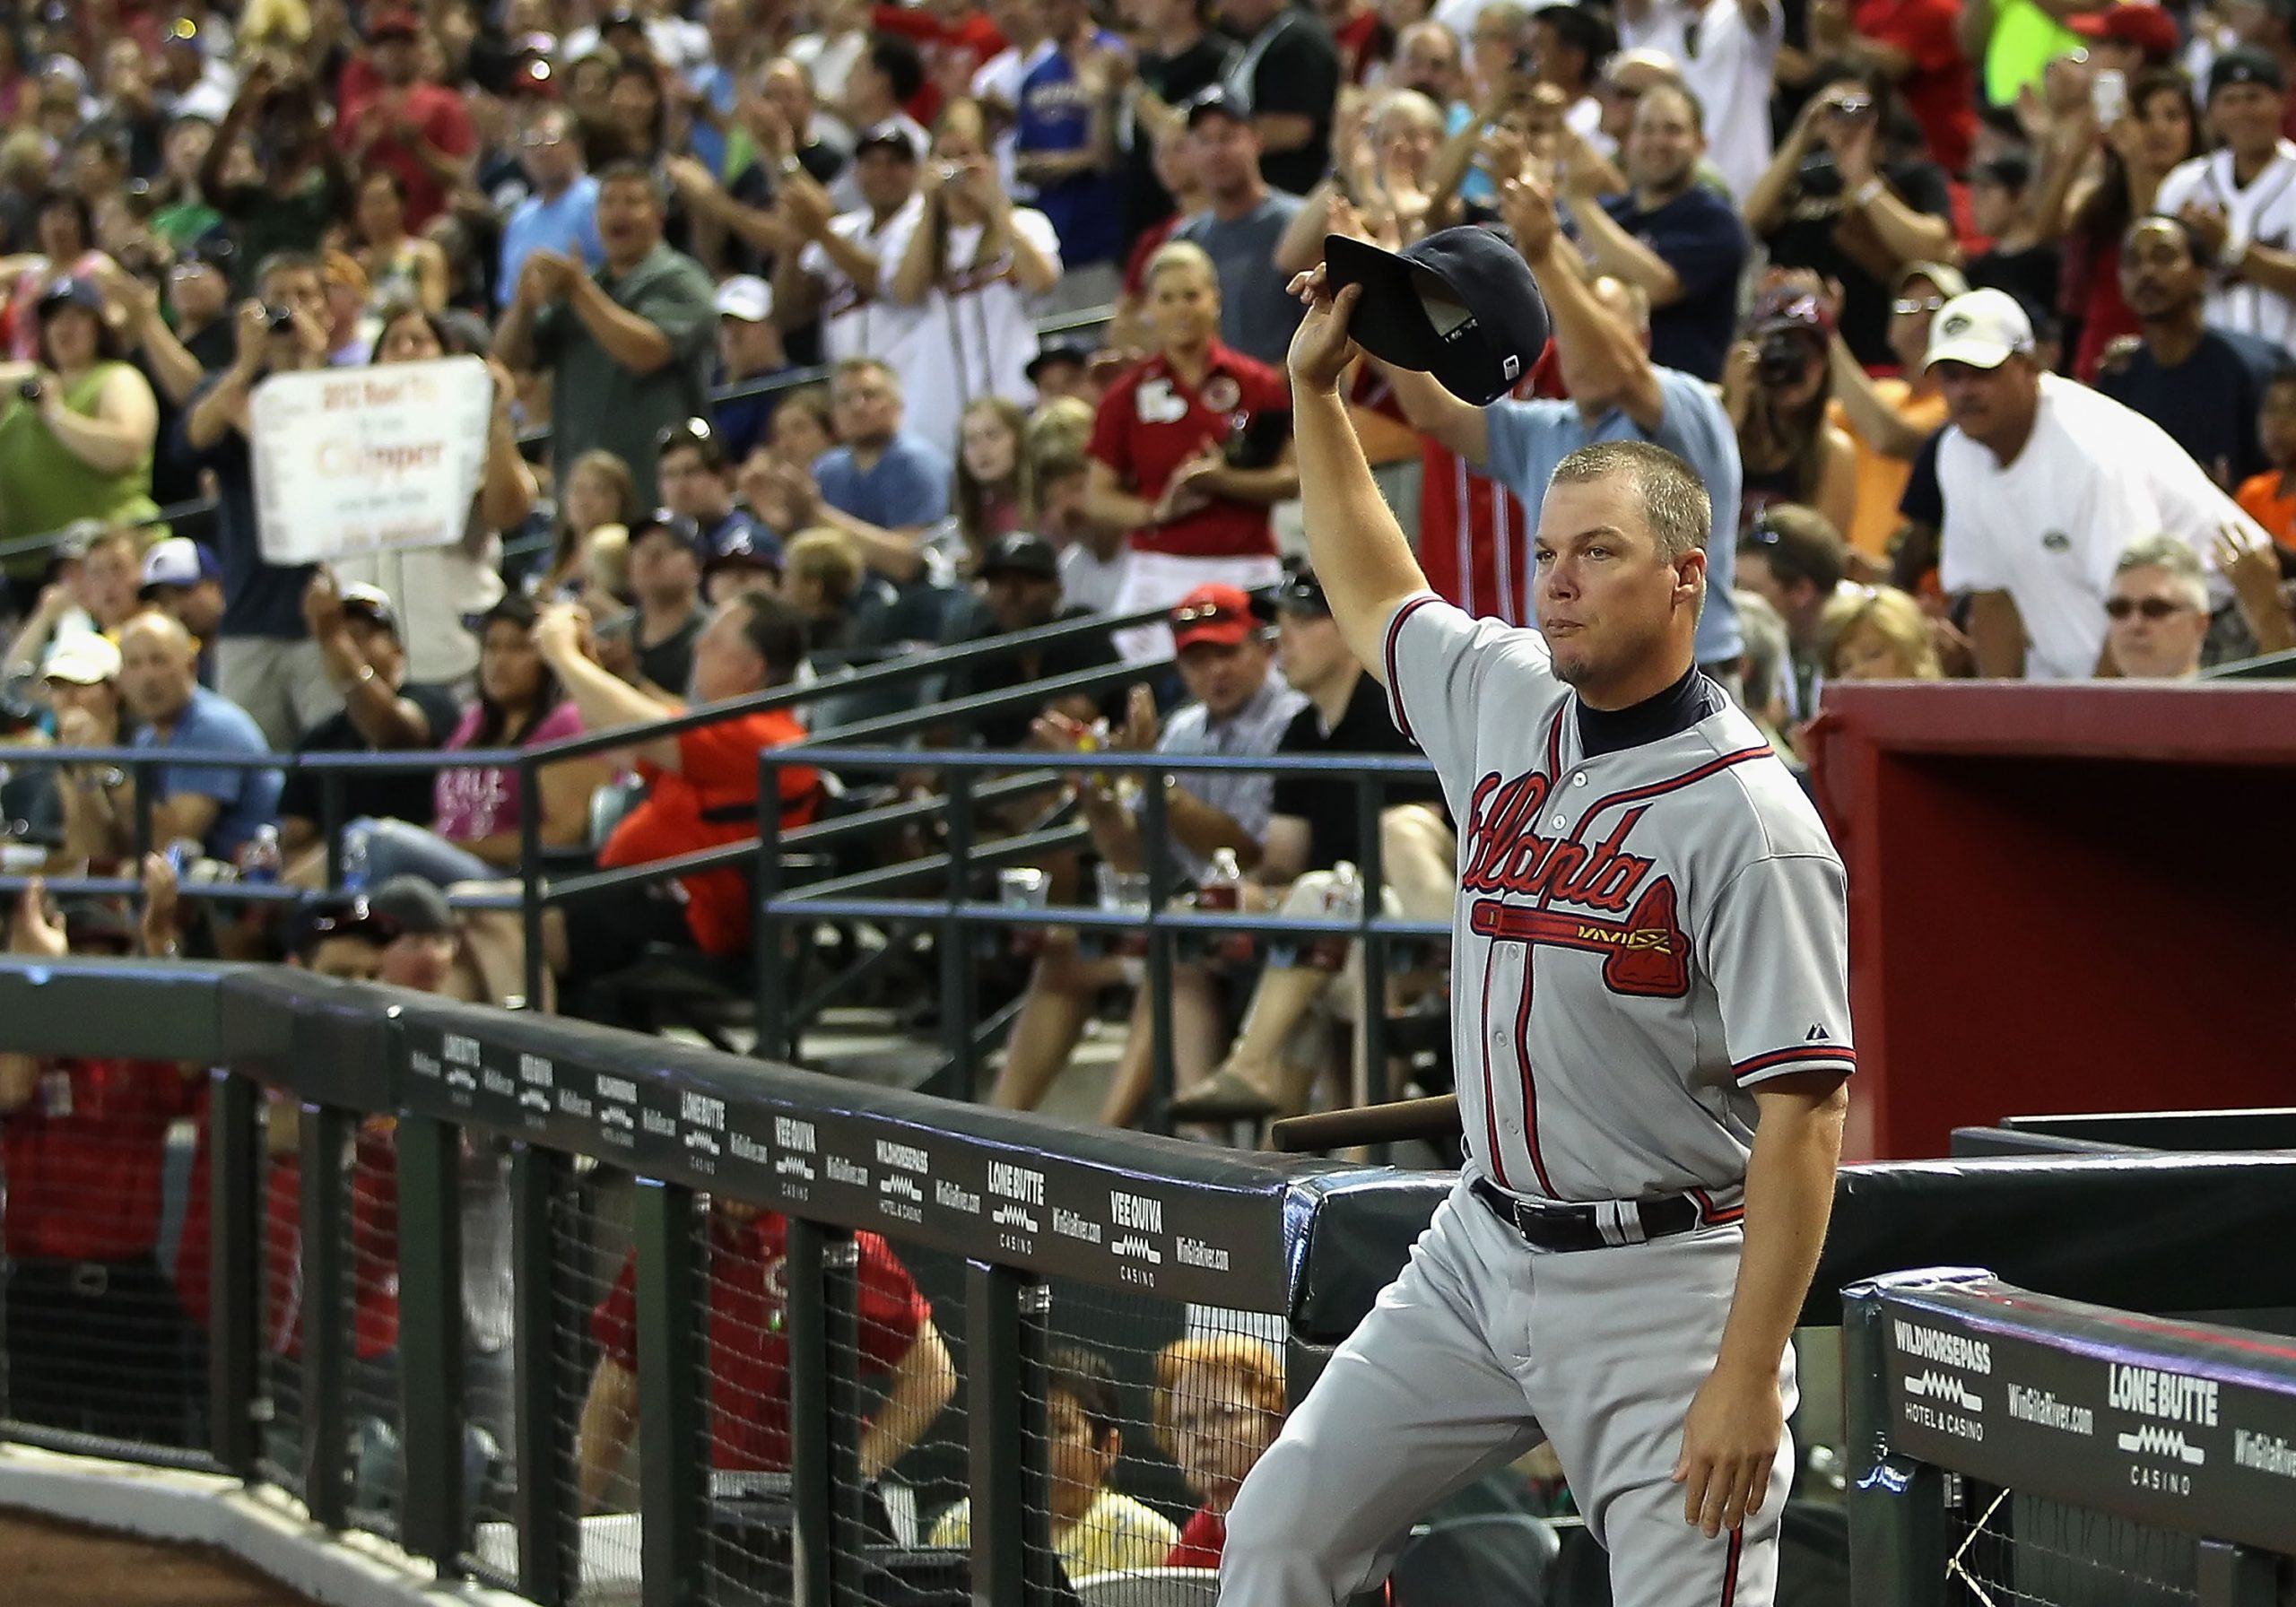 Chipper Jones of the Atlanta Braves waves to the crowd